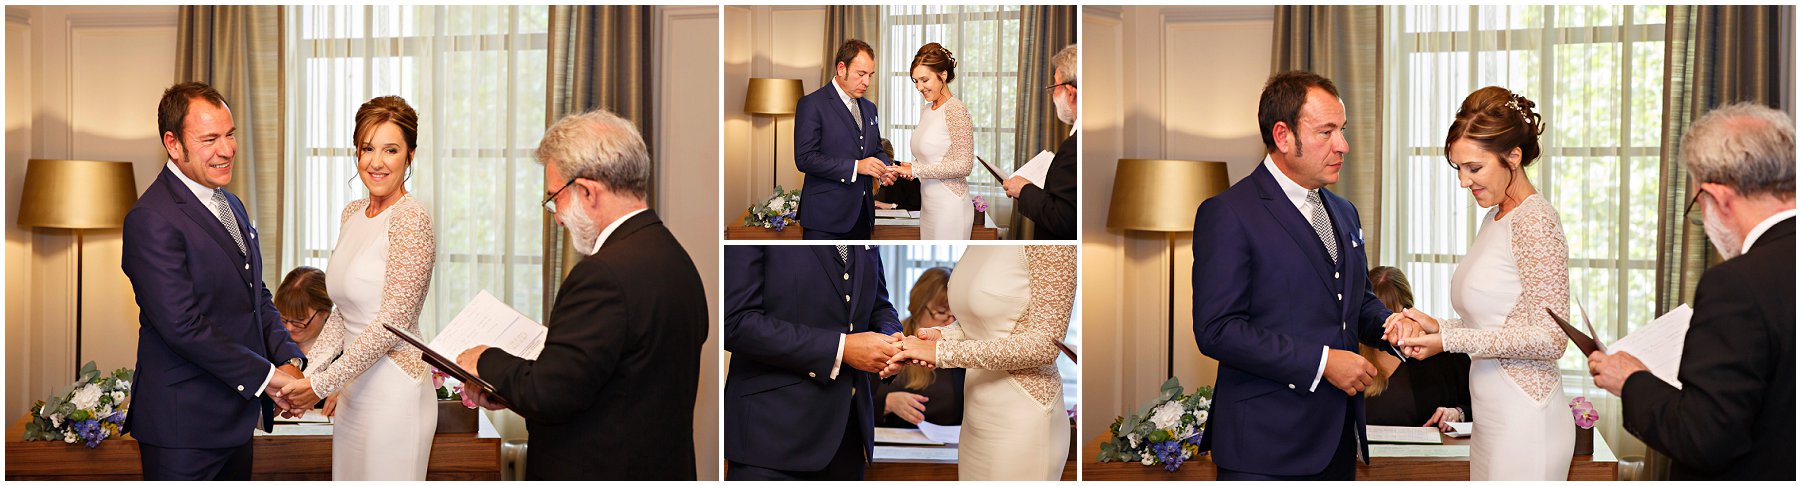 exchanging rings during civil ceremony in the Soho Room